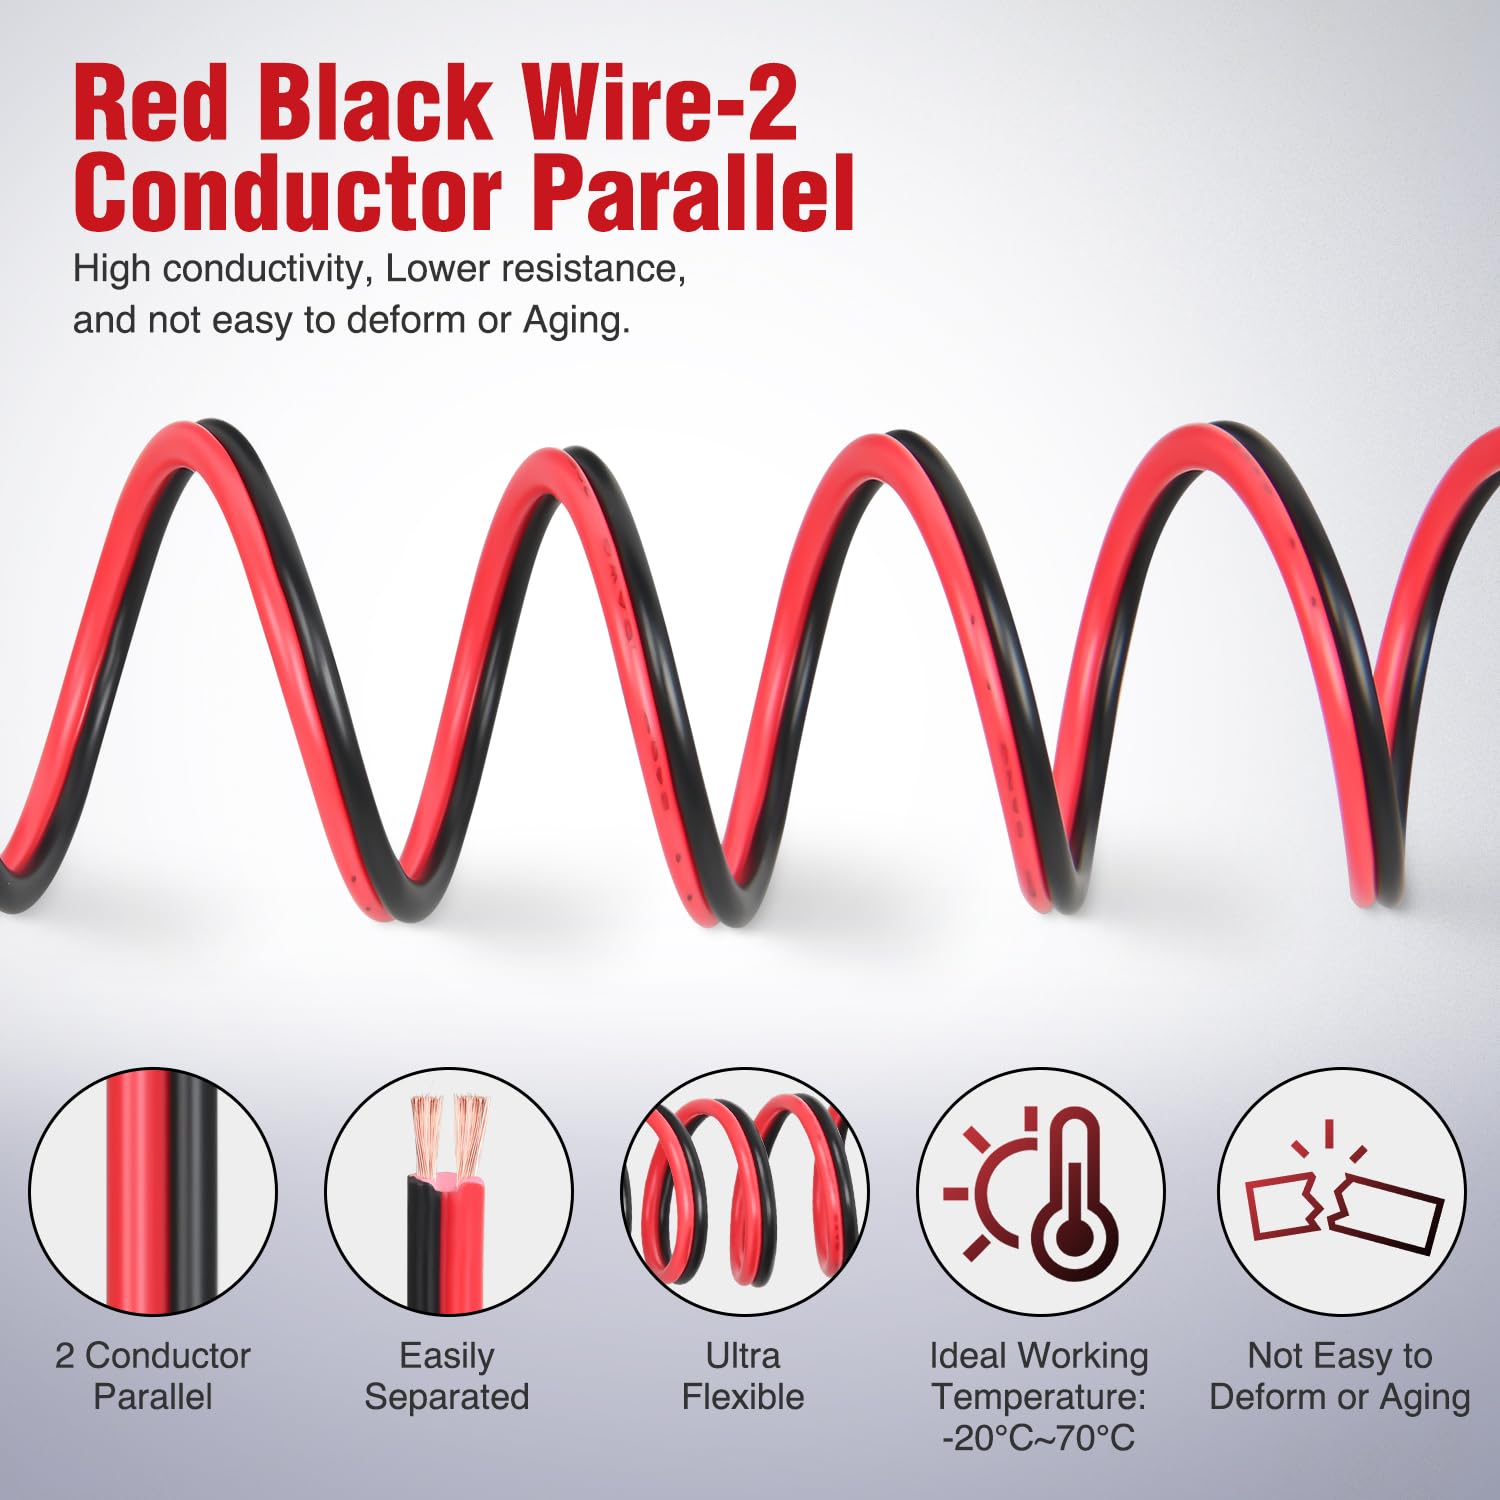 14AWG 100FT Wire Copper Clad Aluminum 2 Conductor Parallel Wire Red Black 12V/24V DC Cable Flexible Extension Cords for Model Train Car Audio Radio Amplifier DIY Nilight